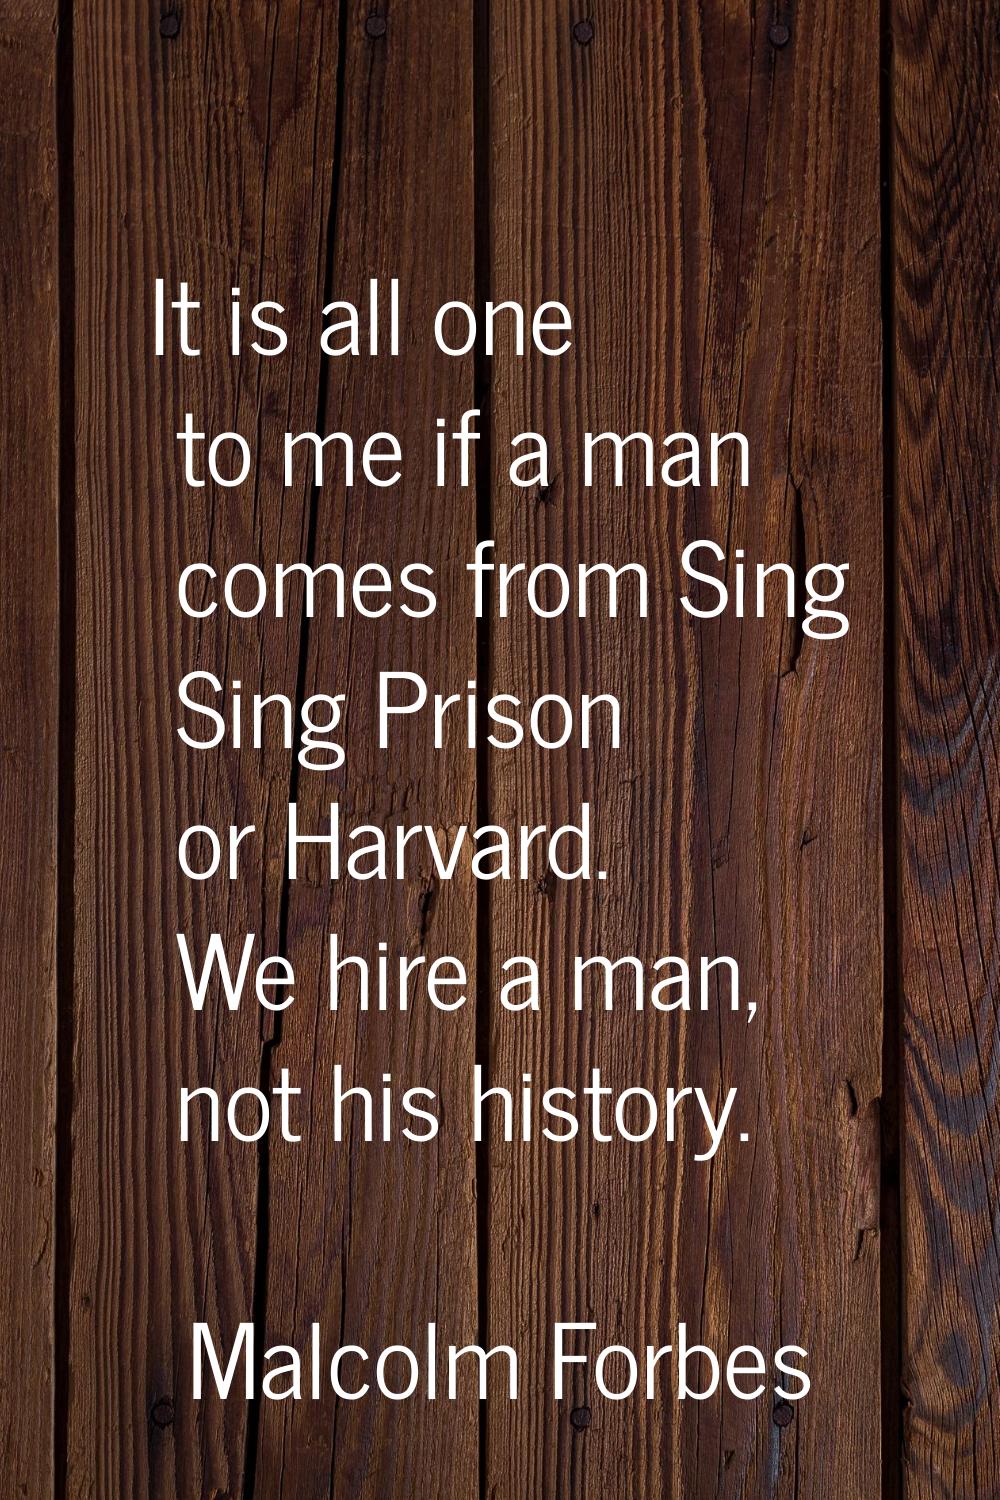 It is all one to me if a man comes from Sing Sing Prison or Harvard. We hire a man, not his history